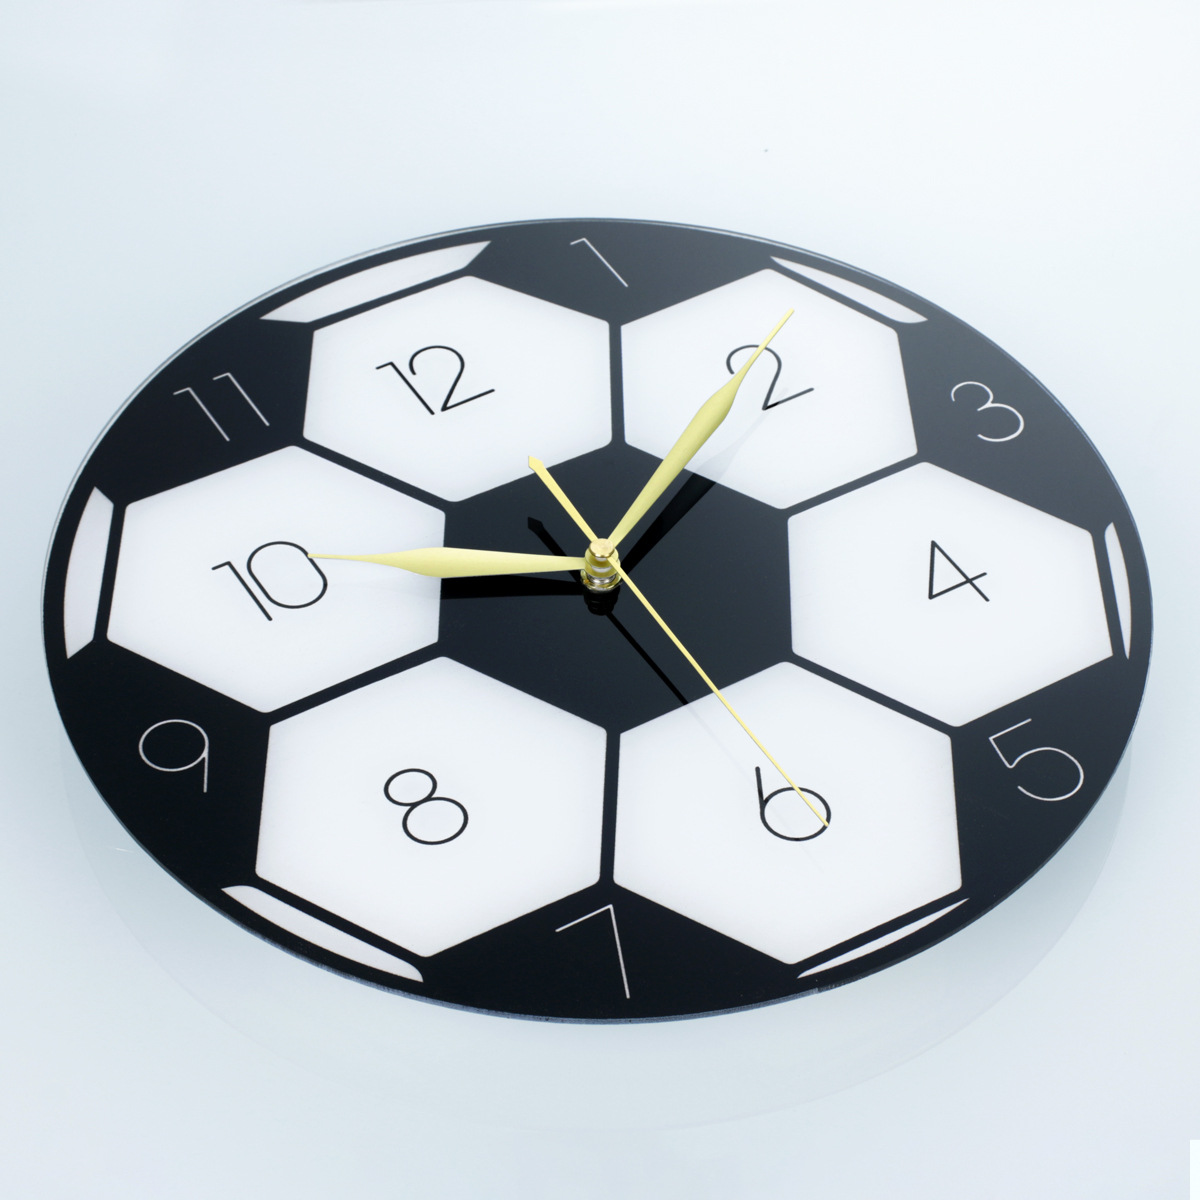 Football Creative Acrylic Wall Clock for Party Restaurant Ktv Family Living Room Bedroom Office Decorations Mute